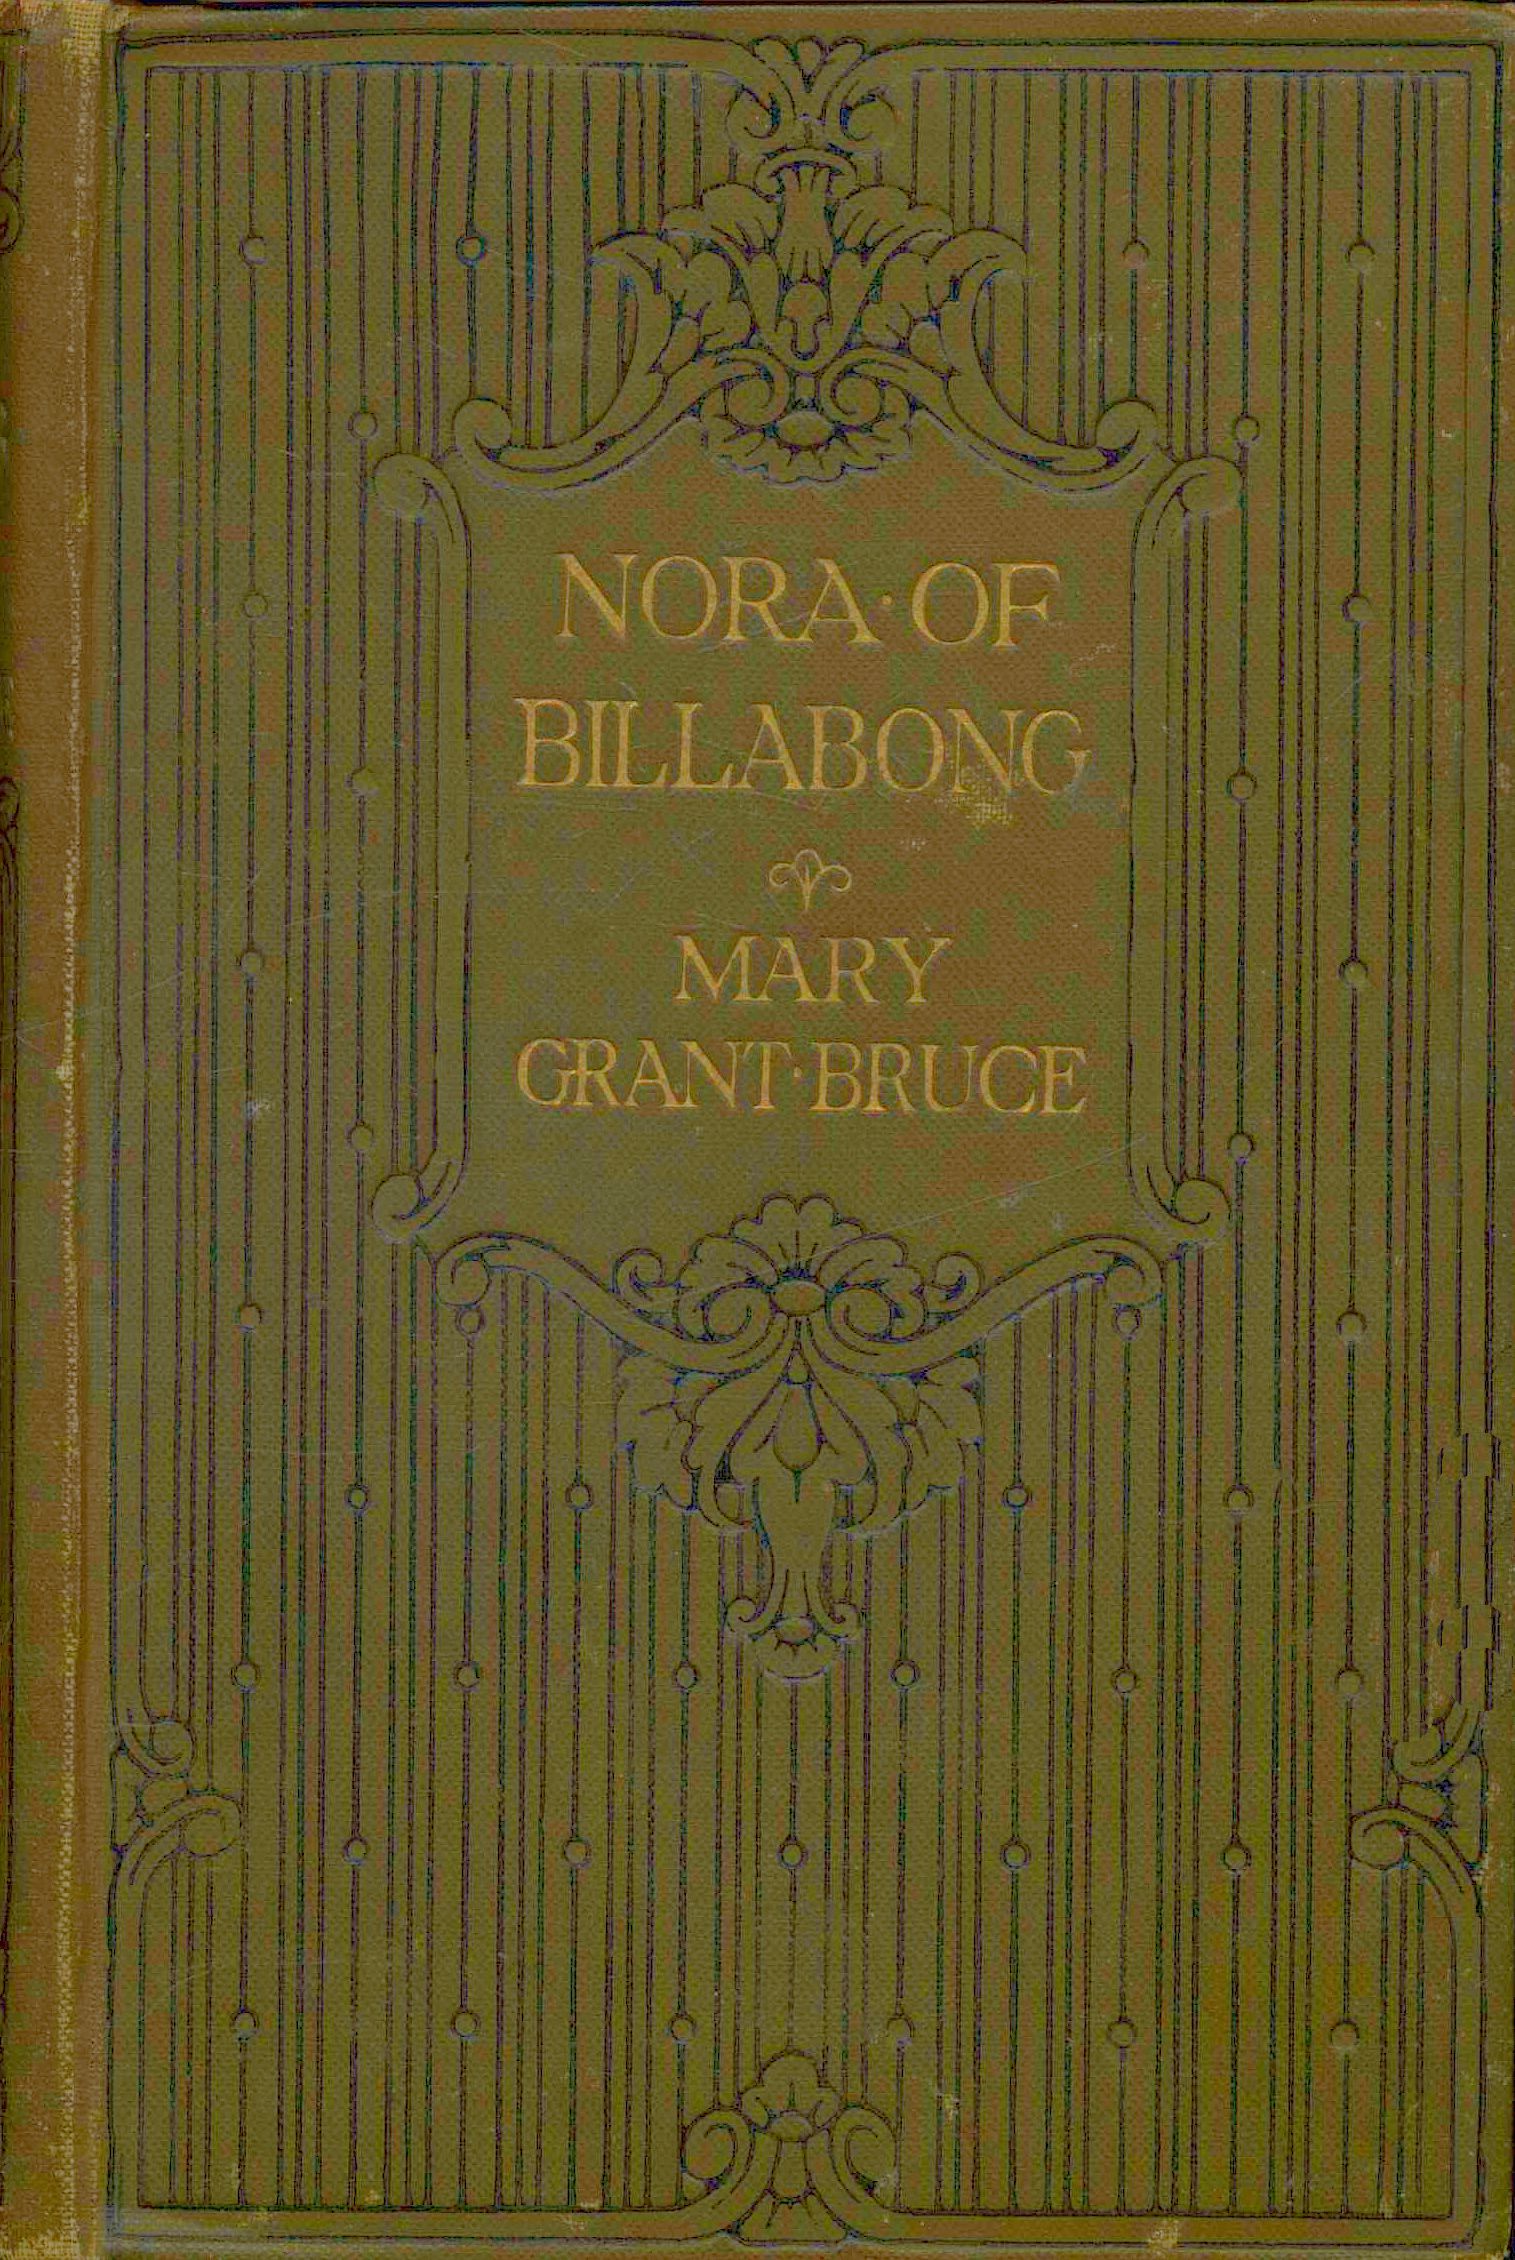 The Project of Grant Gutenberg of Billabong Mary by Norah eBook Bruce